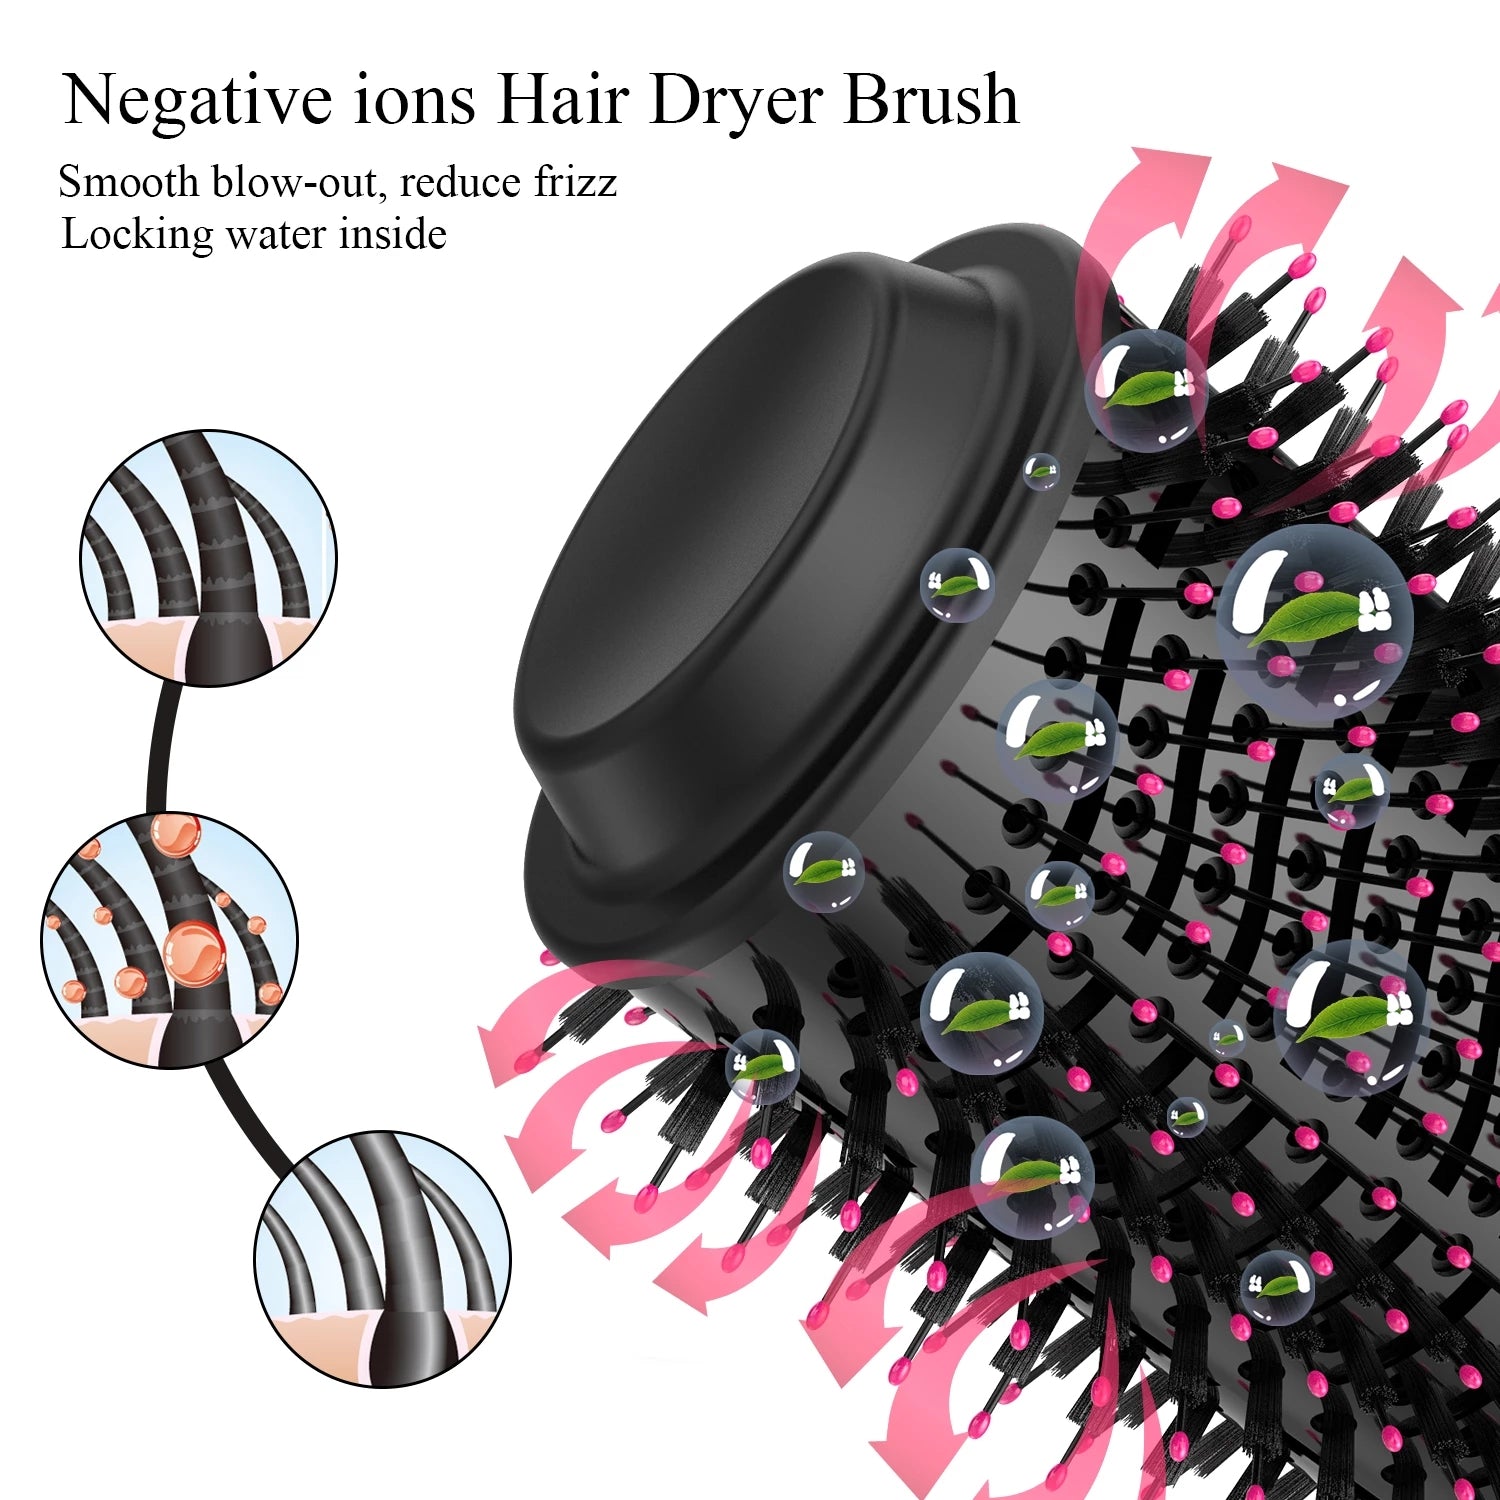 StyleFusion - 2-in-1 Hair Care System - whambeauty